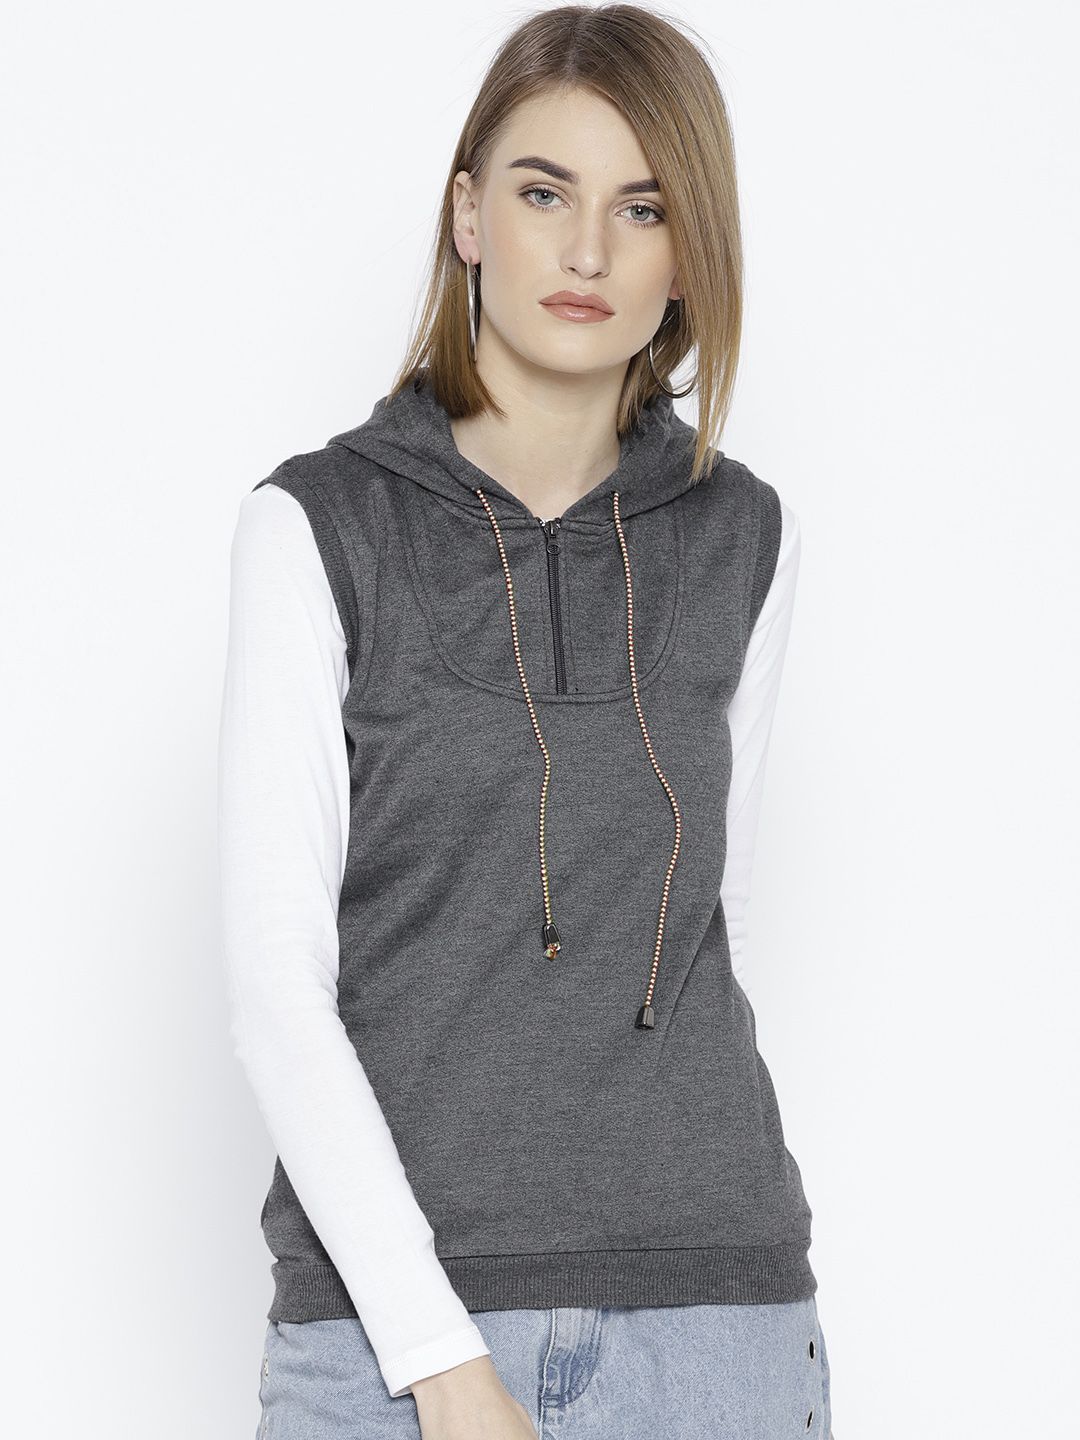 Belle Fille Women Charcoal Grey Solid Hooded Sweatshirt Price in India